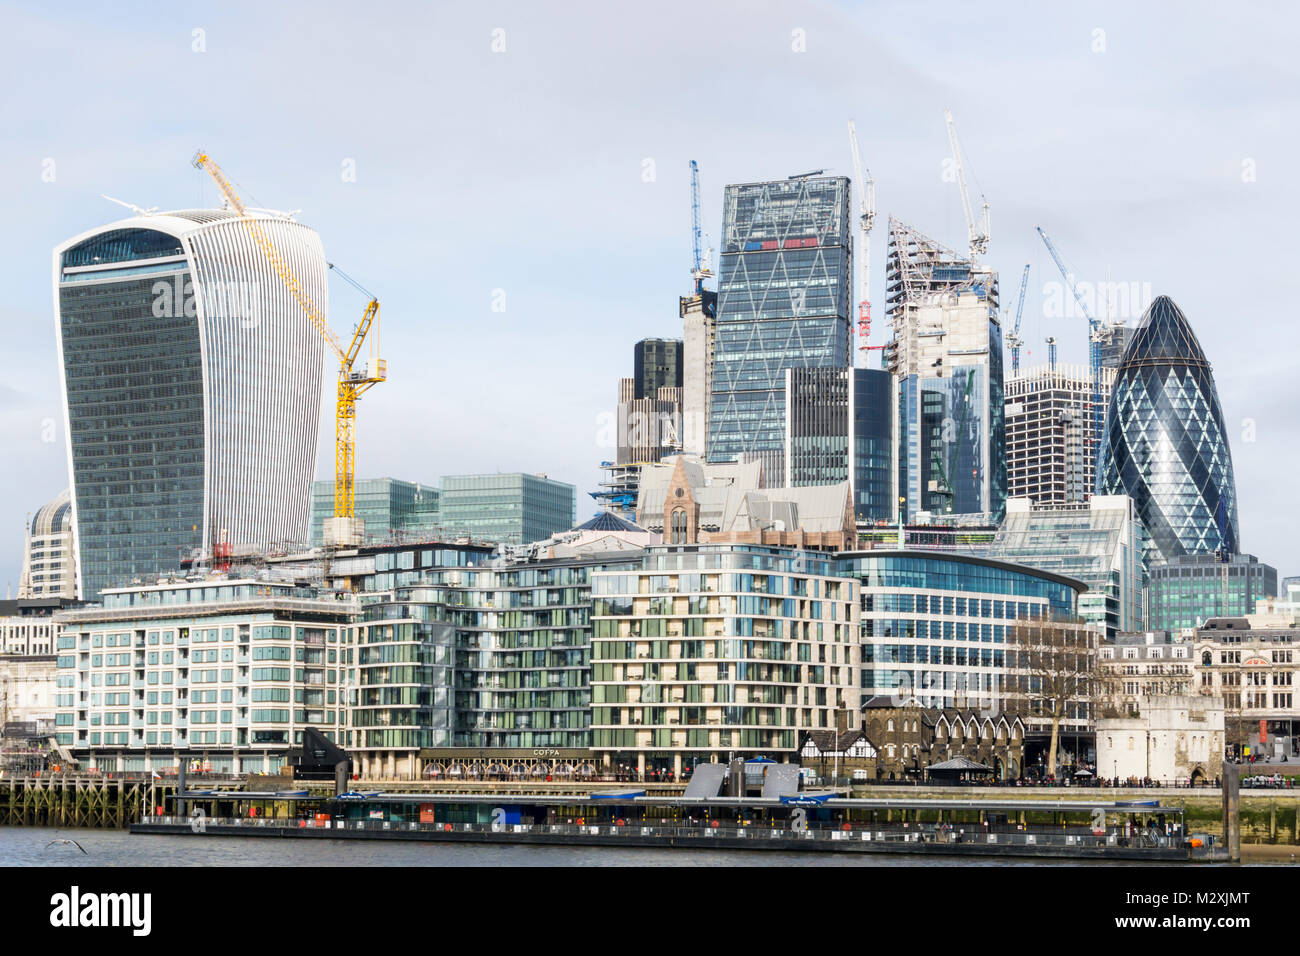 The dense commercial development of the City of London skyline seen across the River Thames. Stock Photo